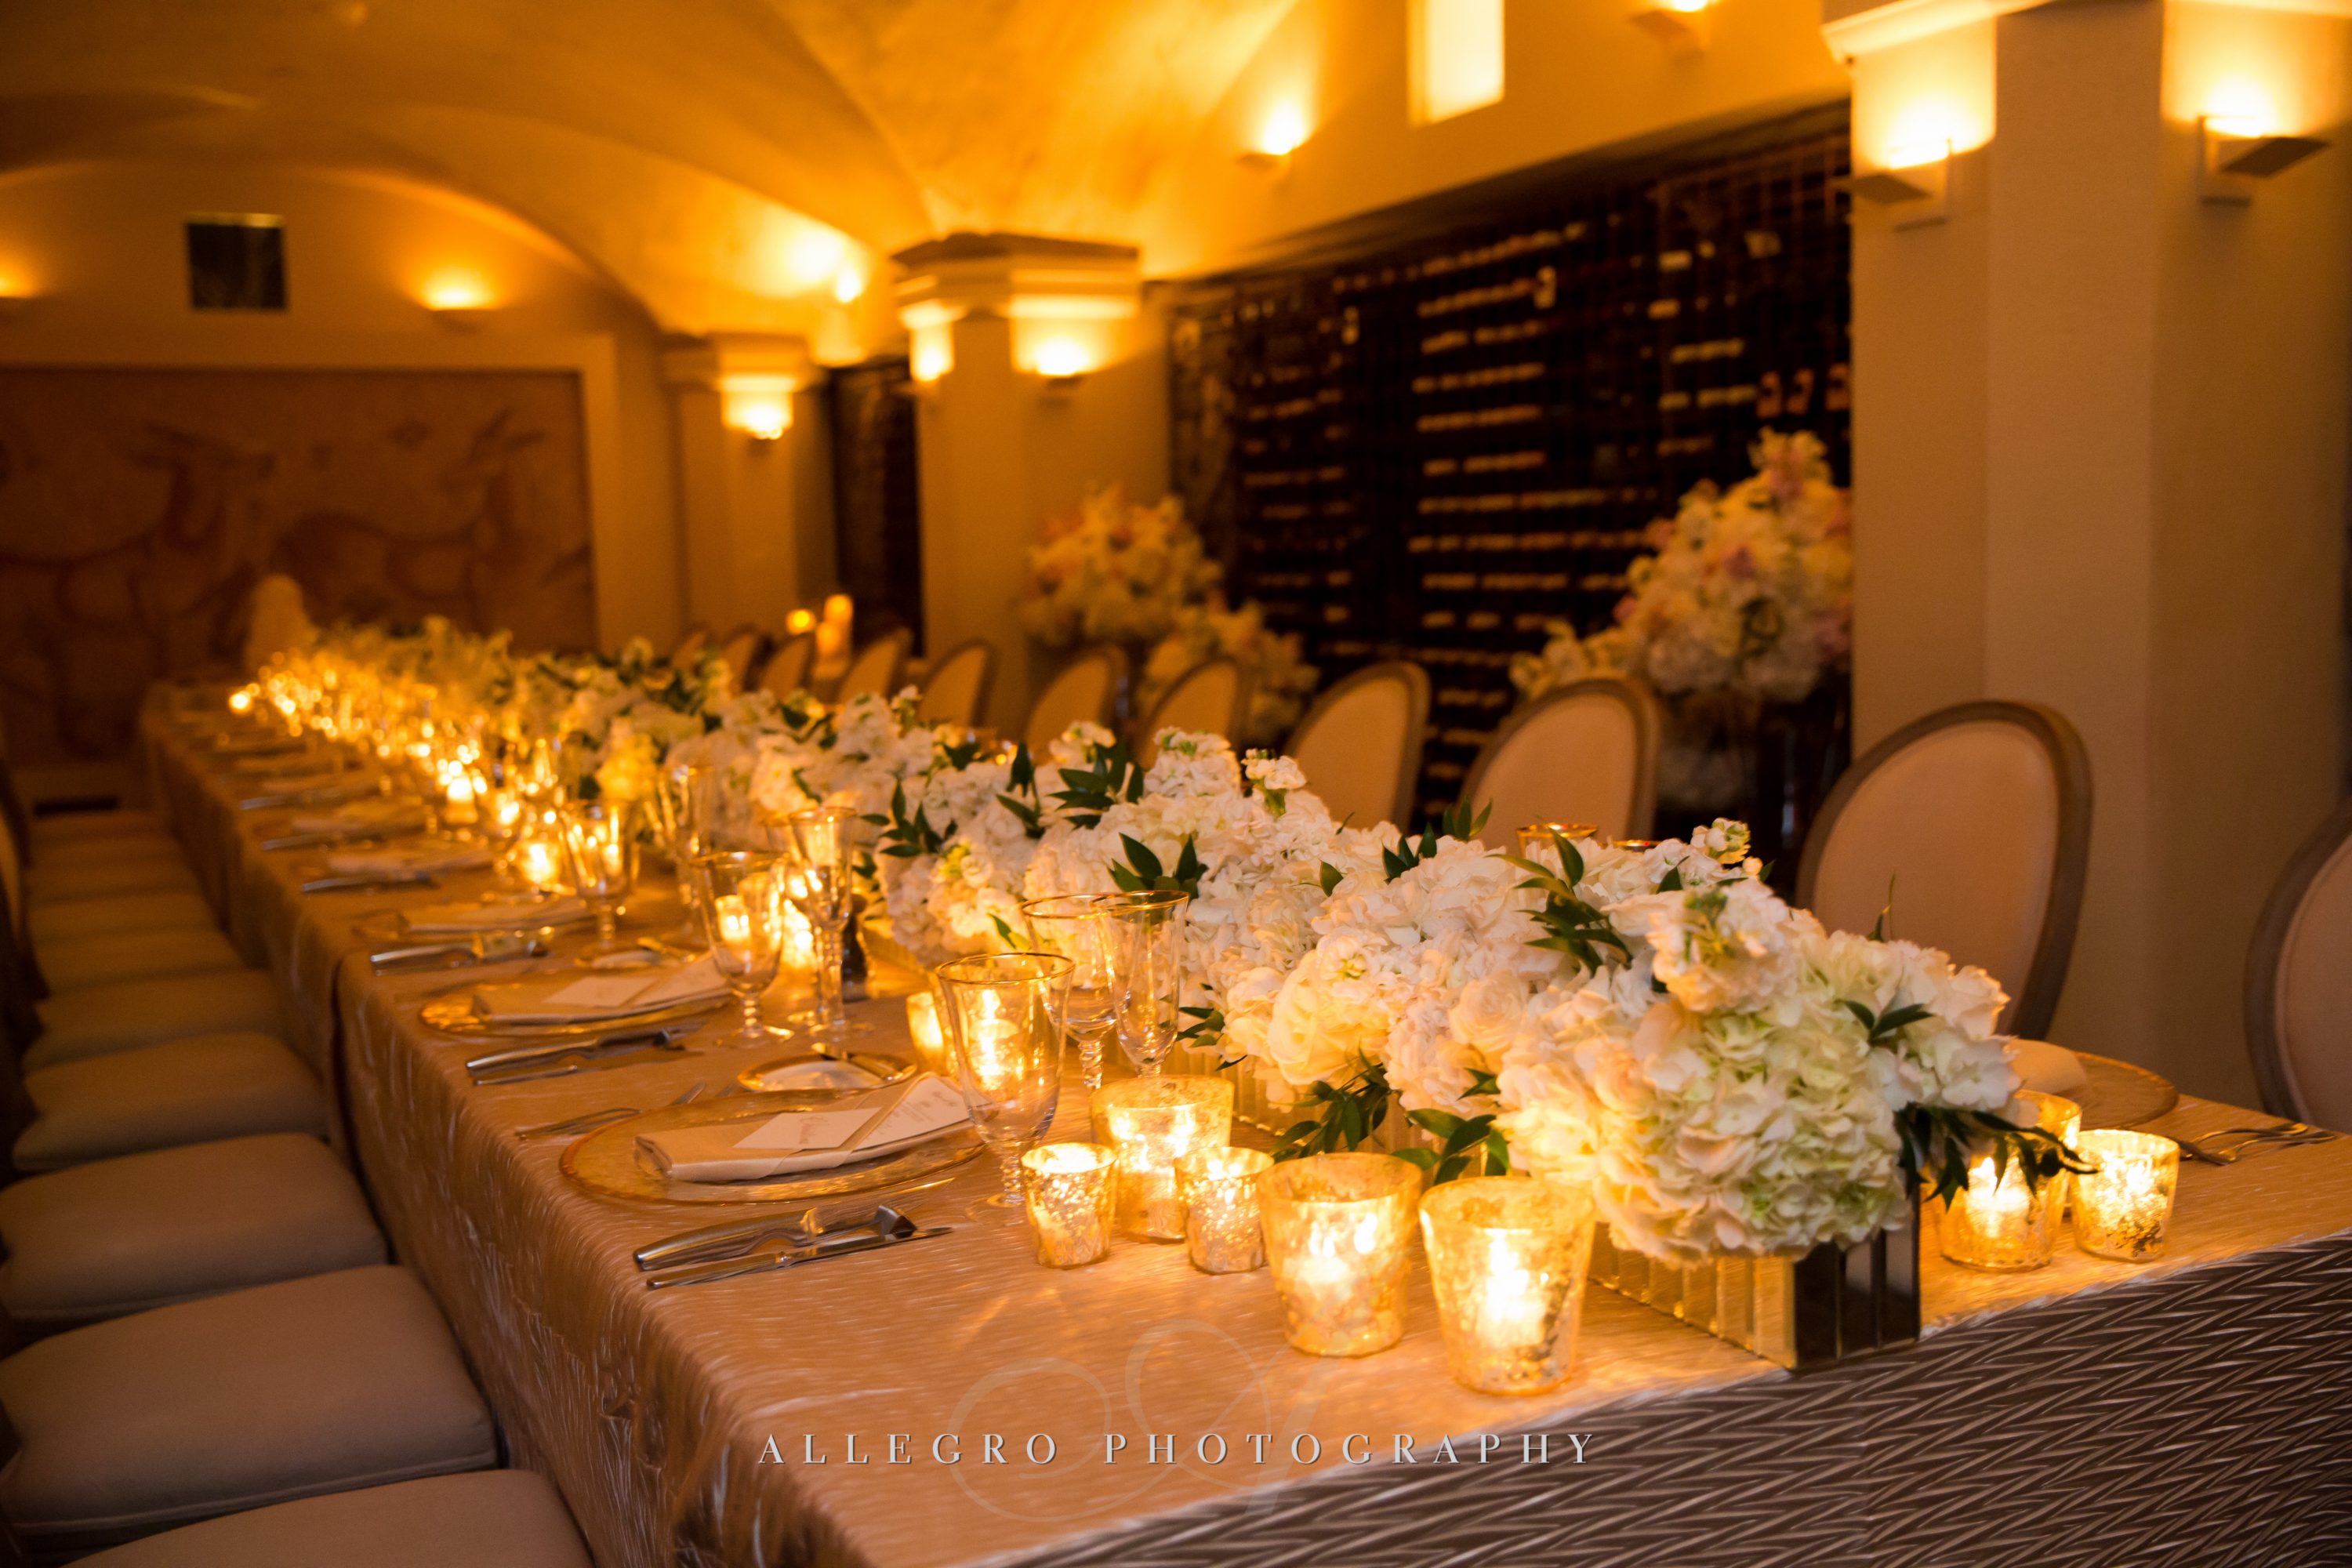 Flou(-e)r_Specialty_Floral_Events_Corporate_Event